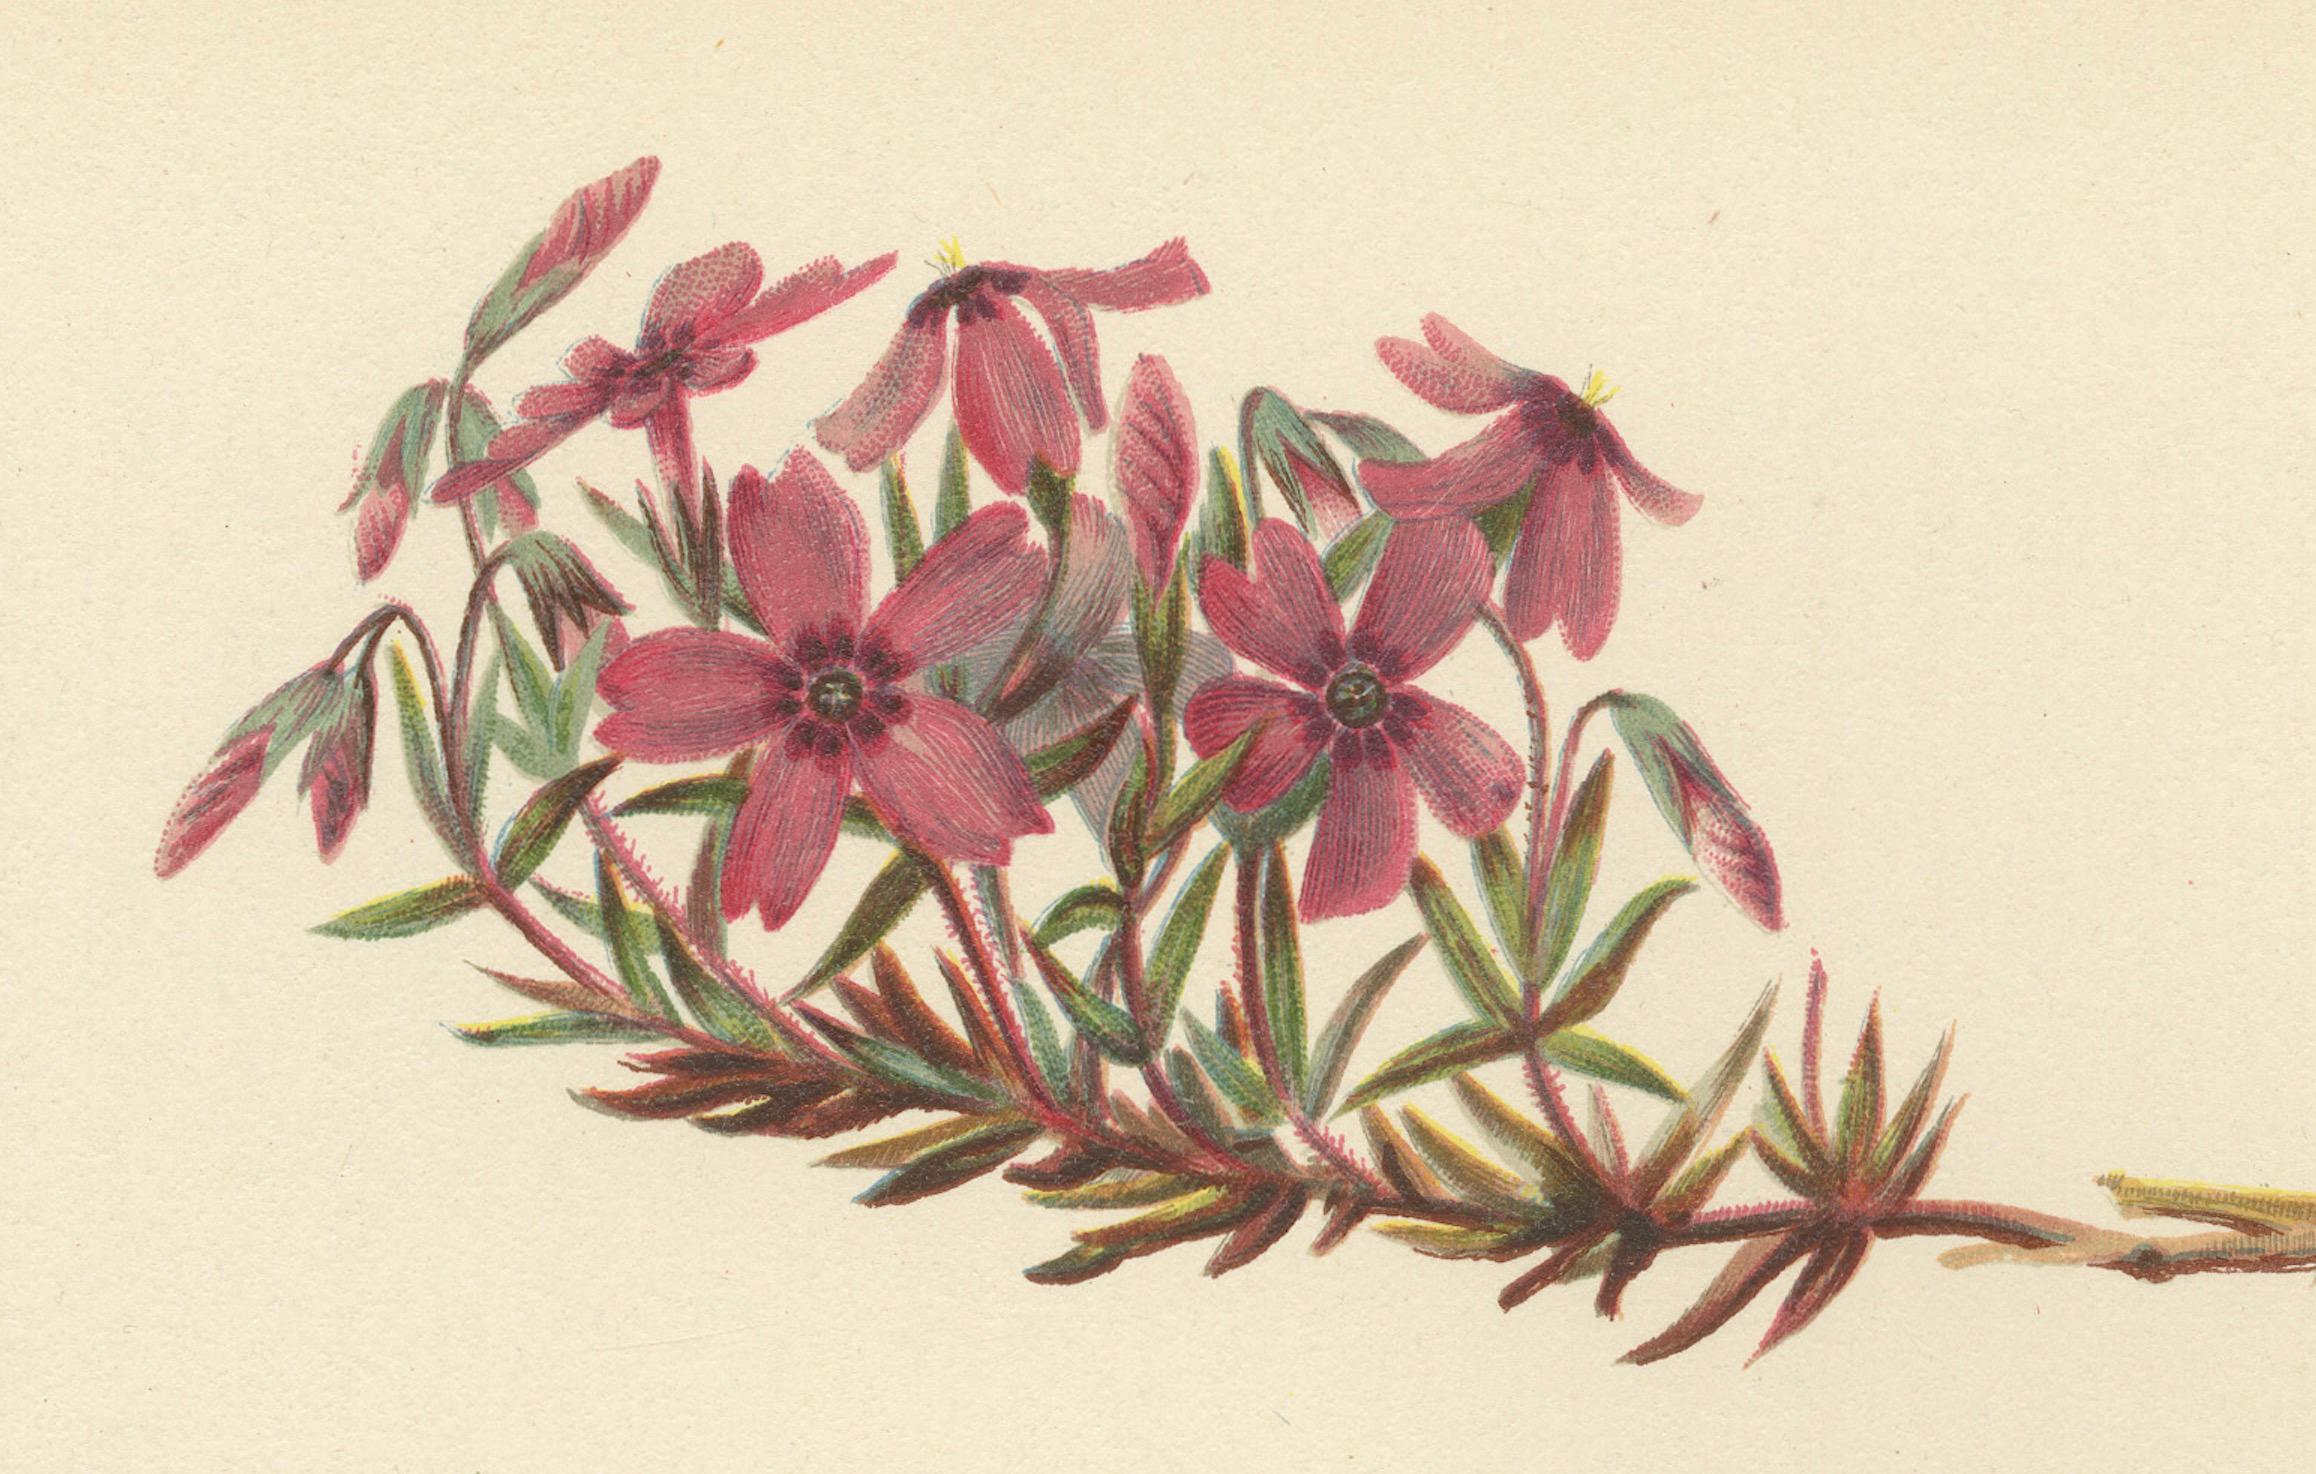 Late 19th Century Vibrant Creeping Phlox: The Cascade of Color, Published in 1879